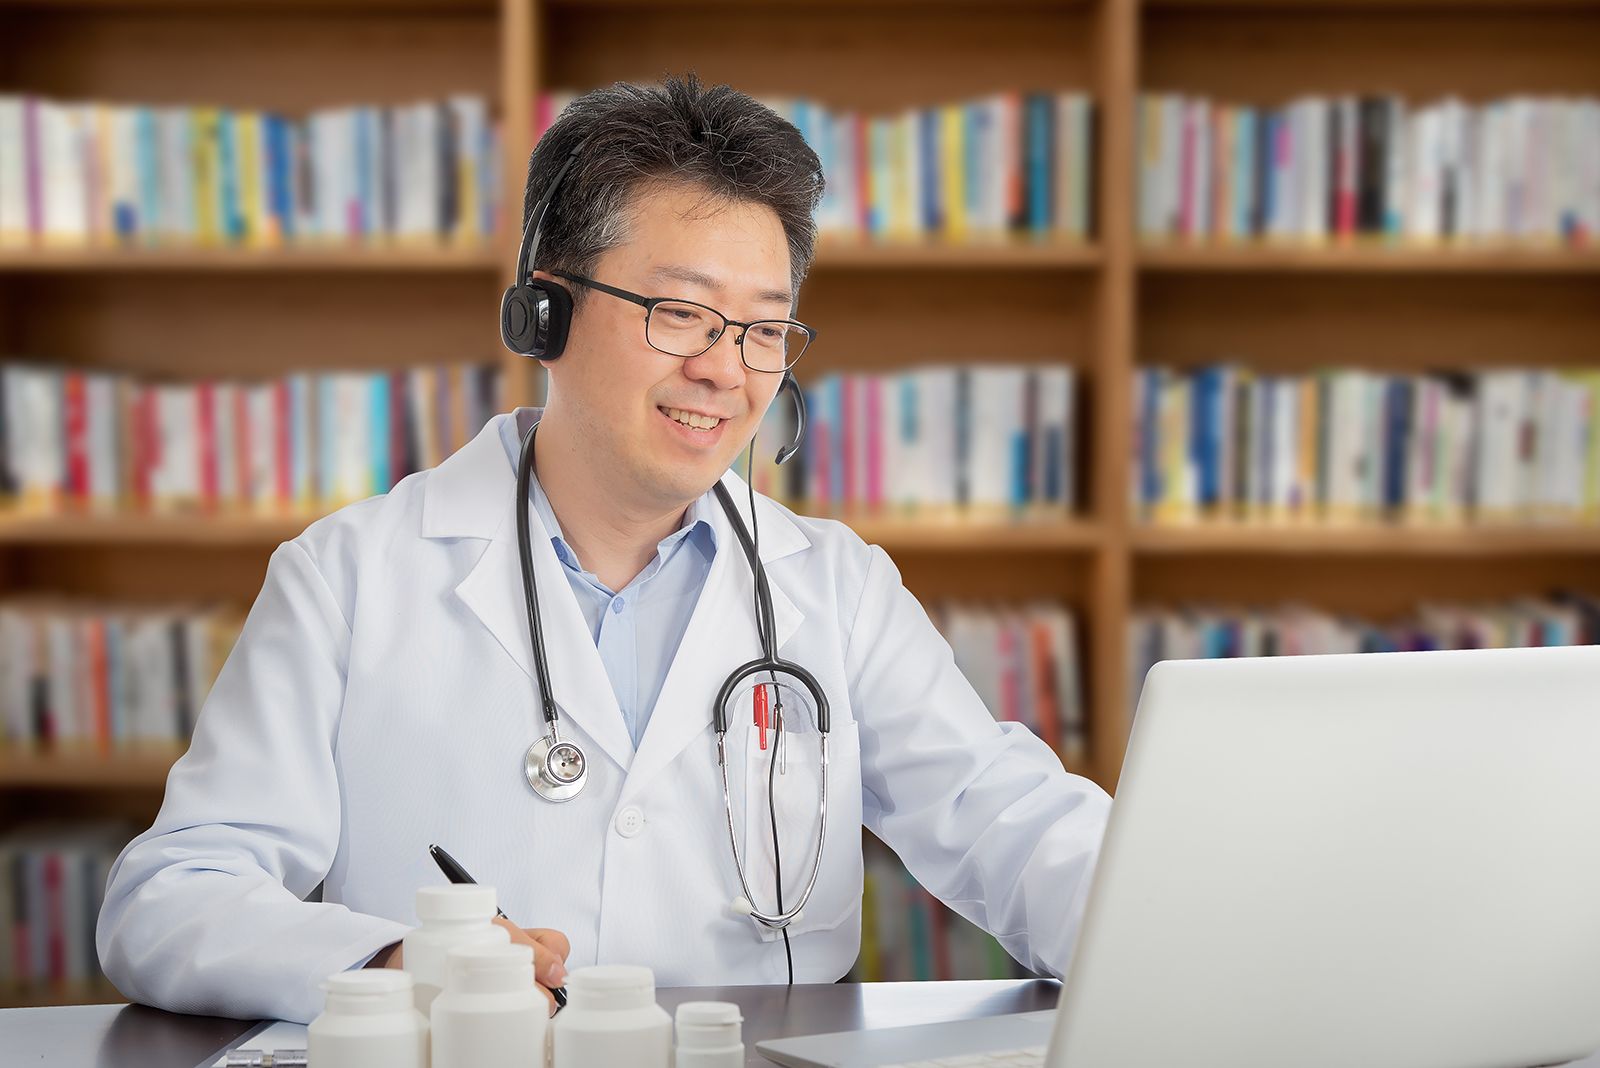 4 Best HIPAA Compliant Telehealth Apps for Virtual Doctor Visits